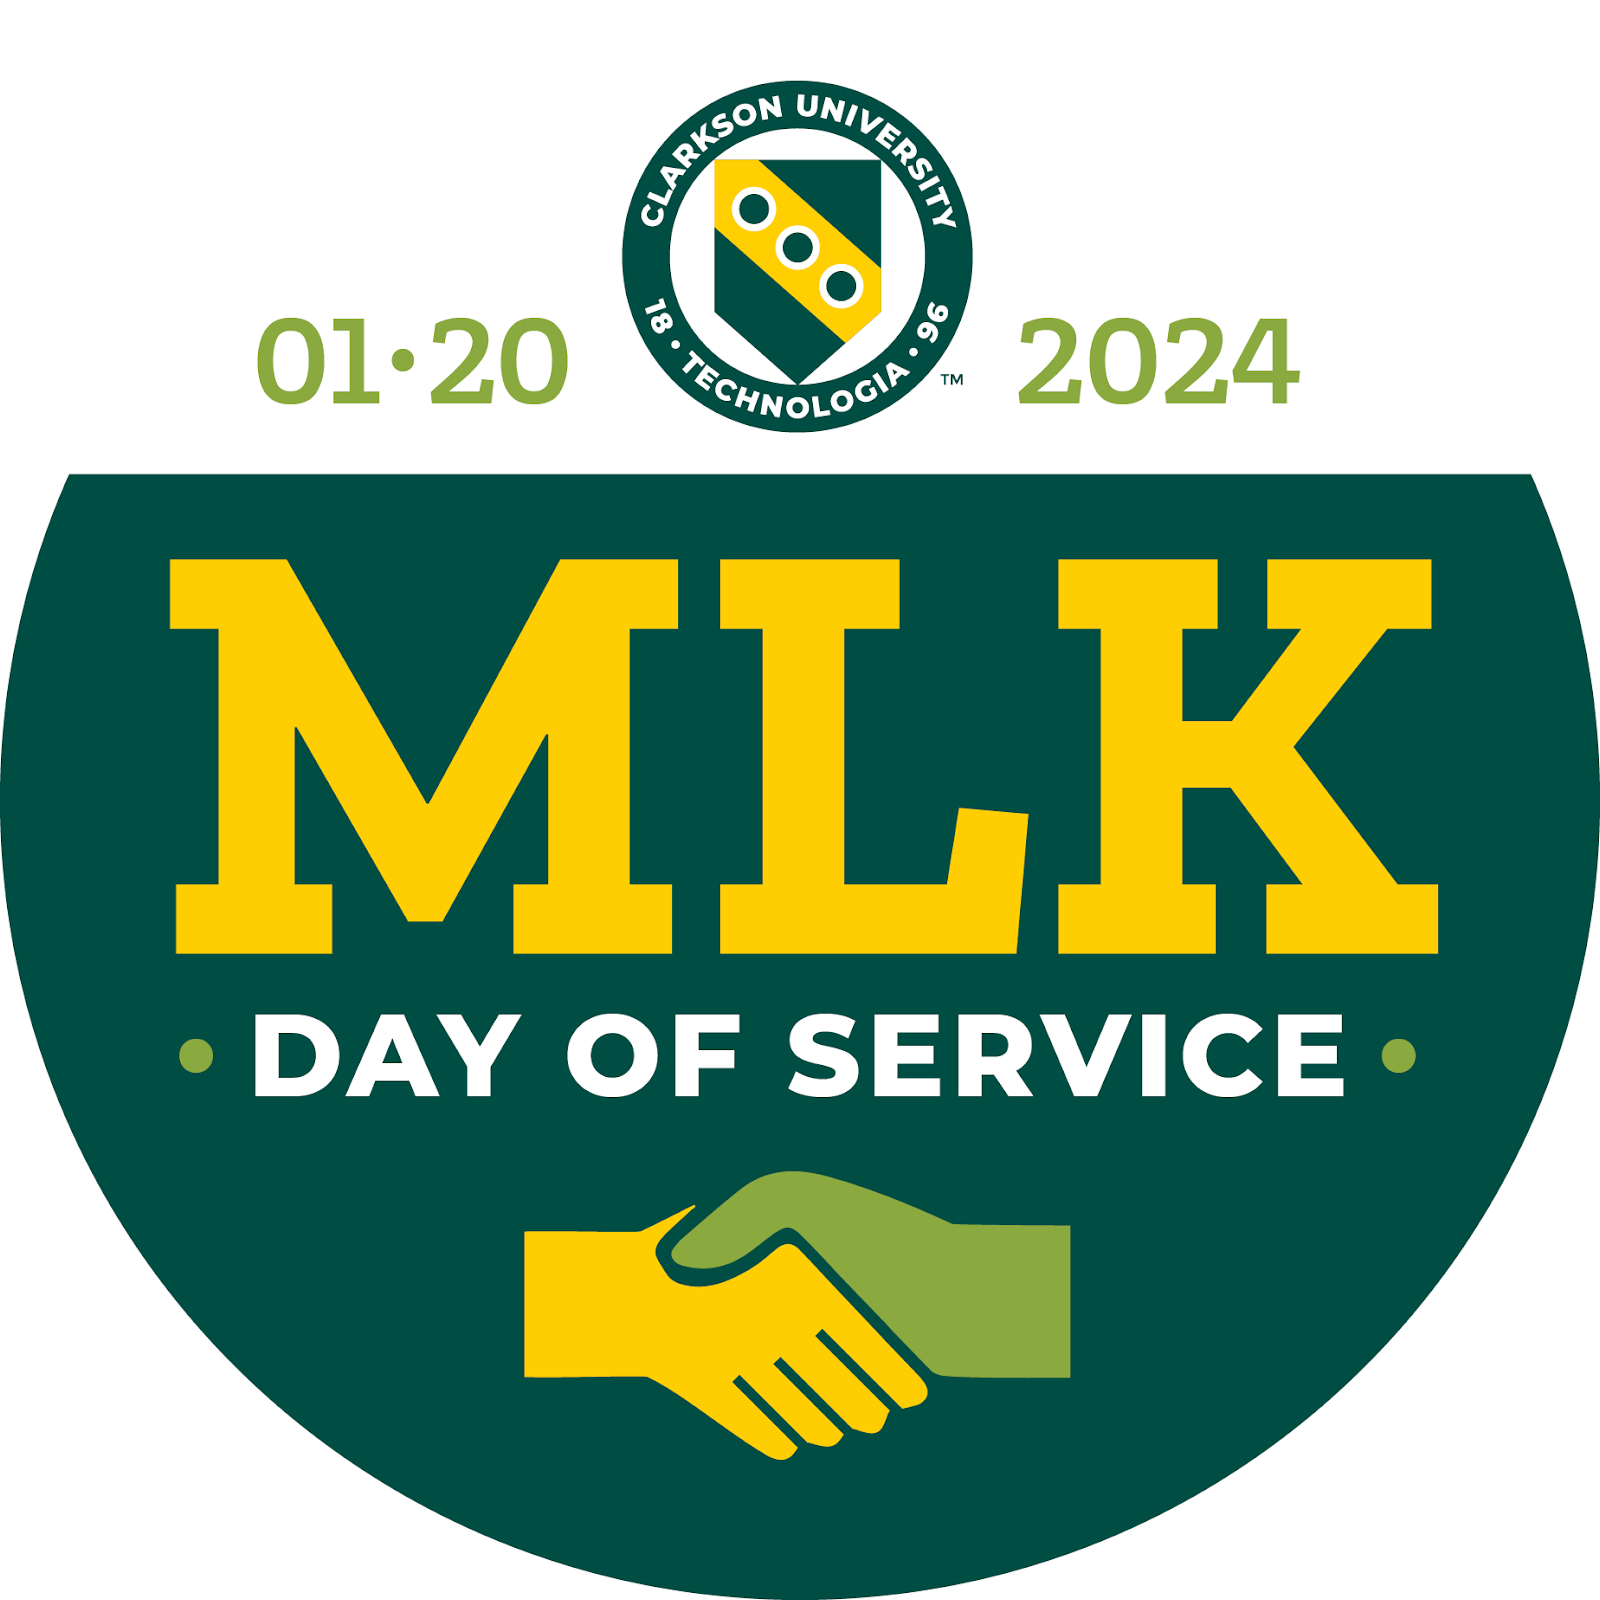 A circular logo with “MLK Day of Service” written in the middle, with the date 01.20.2024 surrounding Clarkson’s logo at the top, and a green hand and yellow hand shaking below the middle lettering.